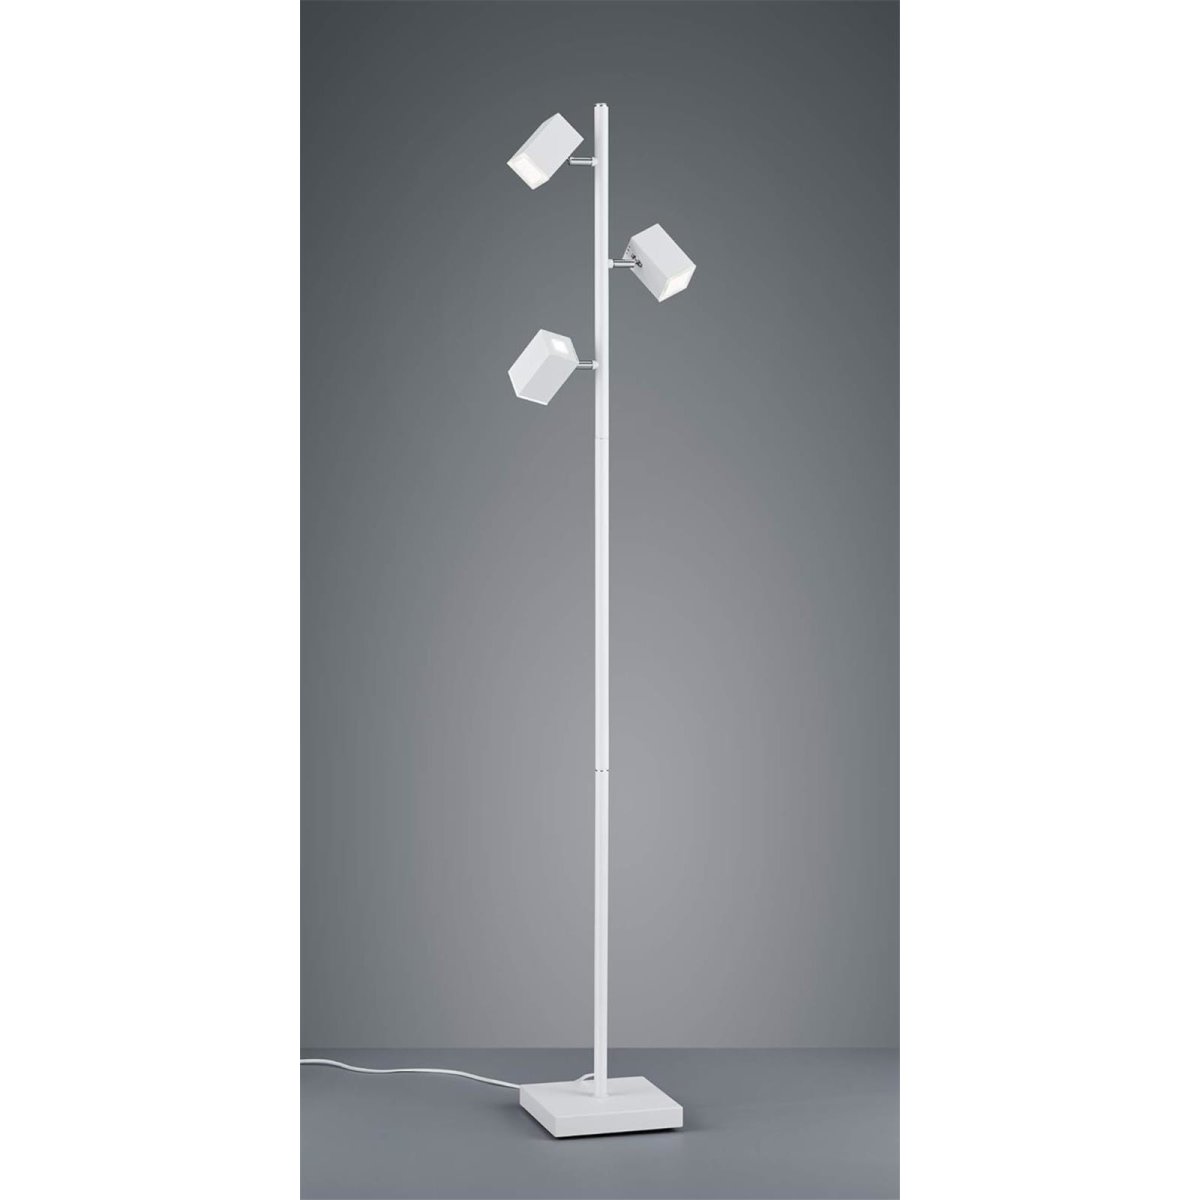 Lagos LED Sc, 14,1W Trio 69,00 3-flammig Stehleuchte € Stehlampe Dimmbar Spots